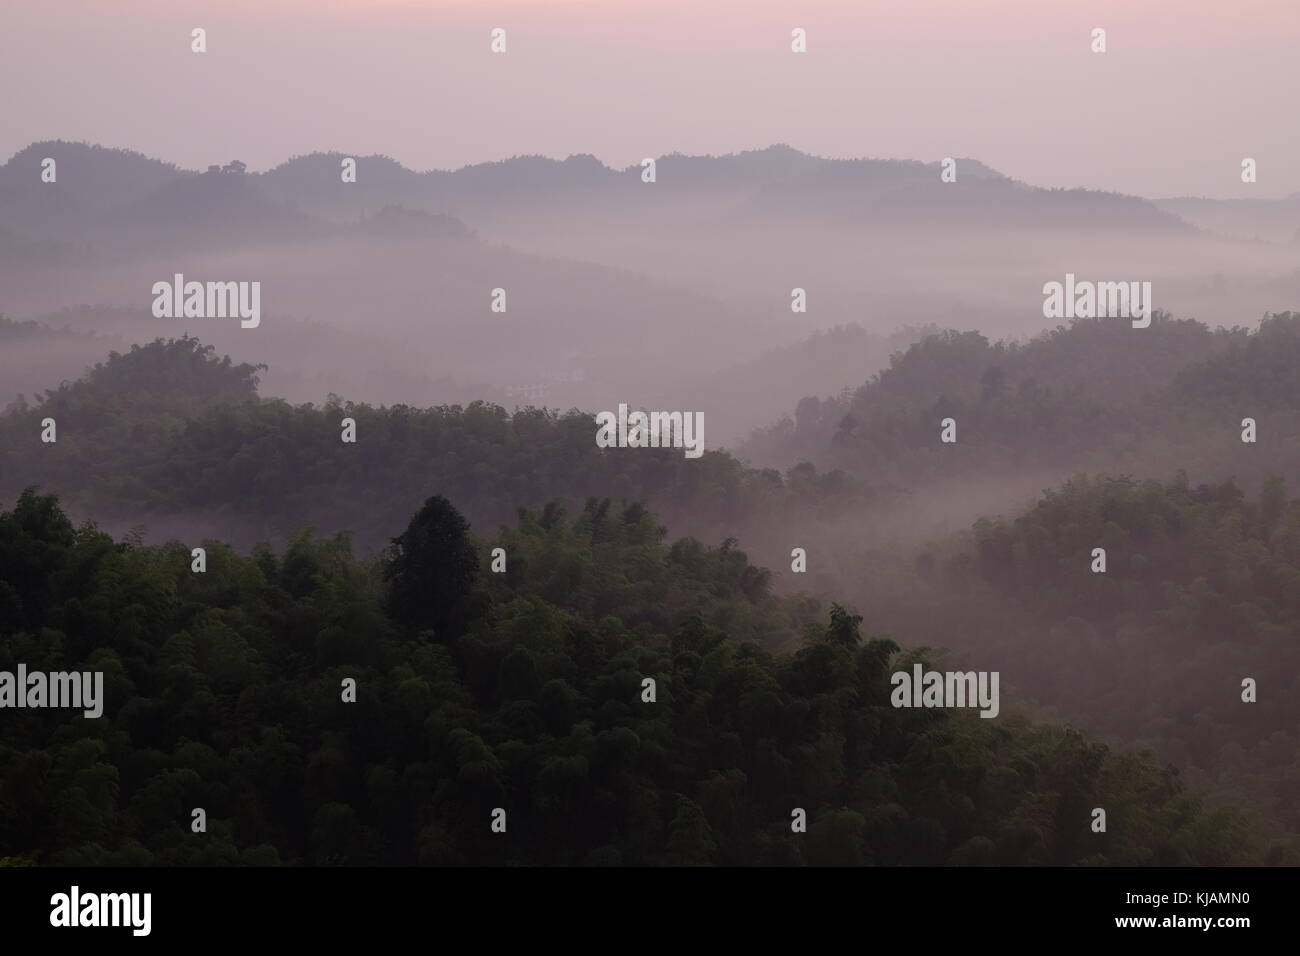 Pink sunrise over the sea of bamboo at the Shunan Bamboo Forest in Sichuan province at China Stock Photo